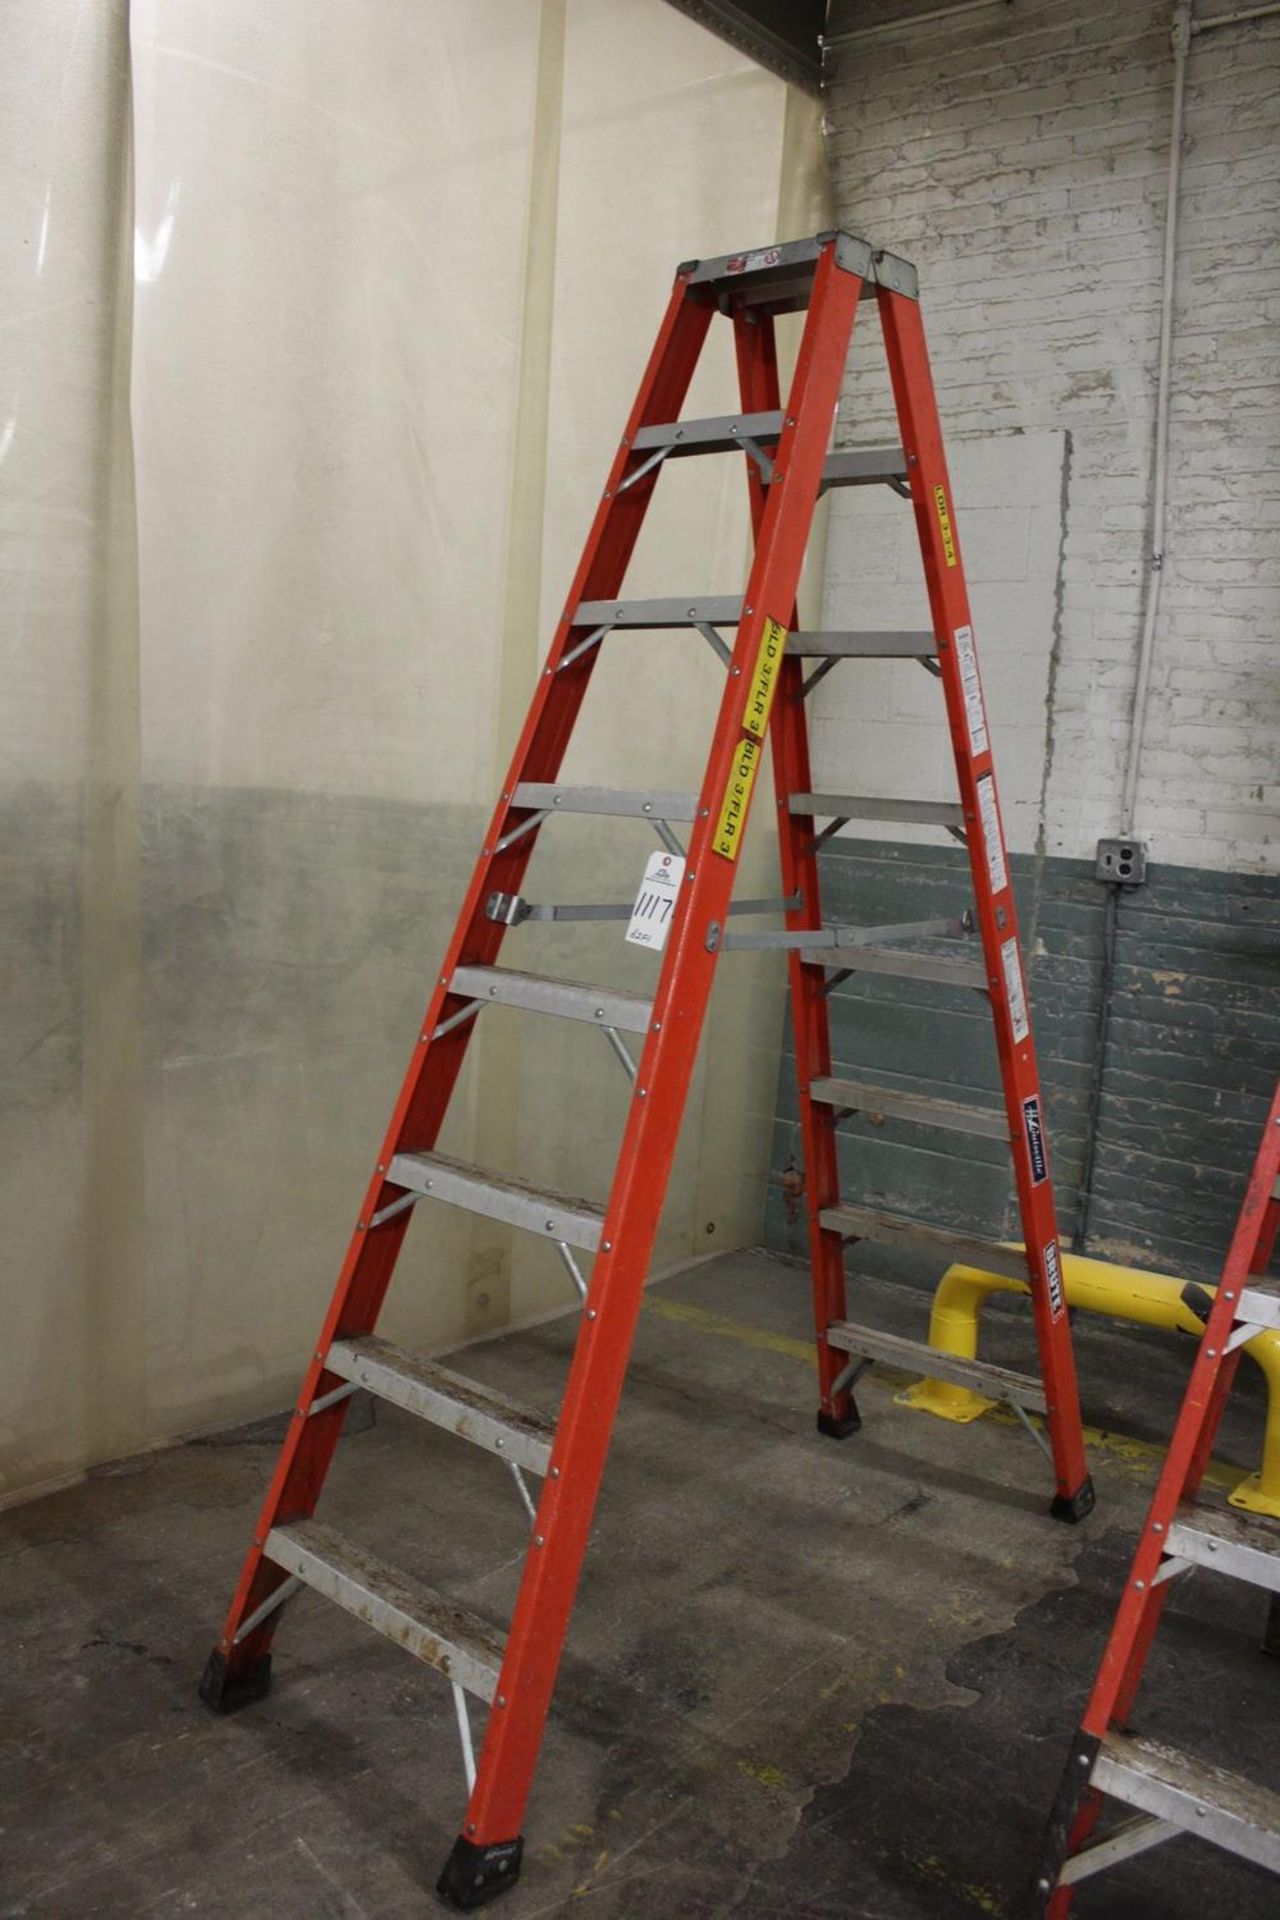 8' Fiberglass Step Ladder | Rig Fee: Hand Carry or Contact Rigger